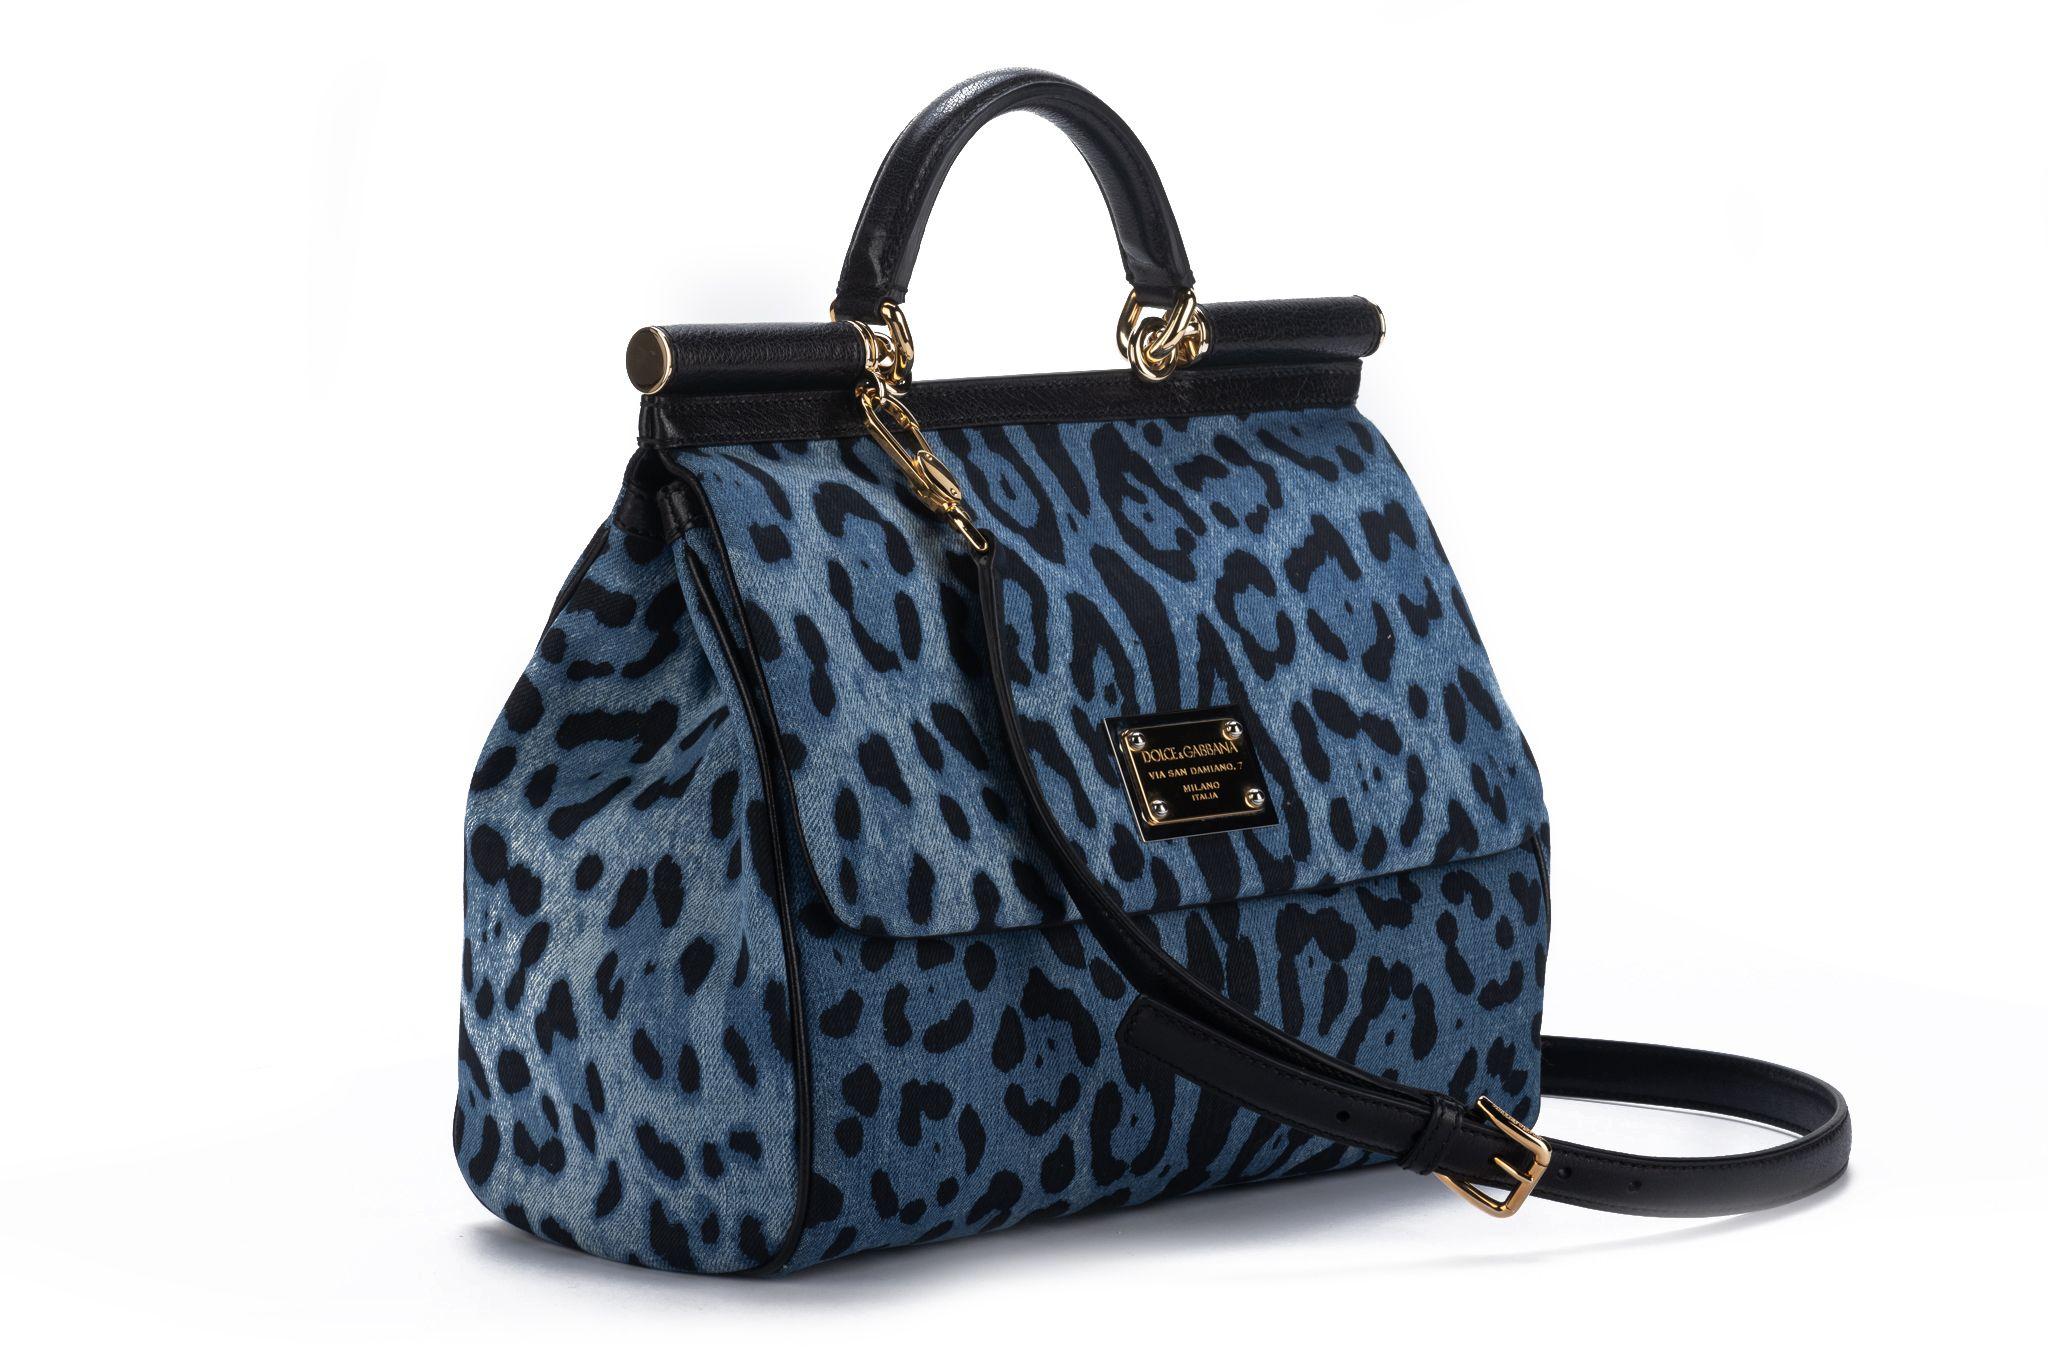 DOLCE & GABBANA new large denim cheetah print handbag, adjustable and detachable strap. Comes with ID card, booklet and original dust cover.